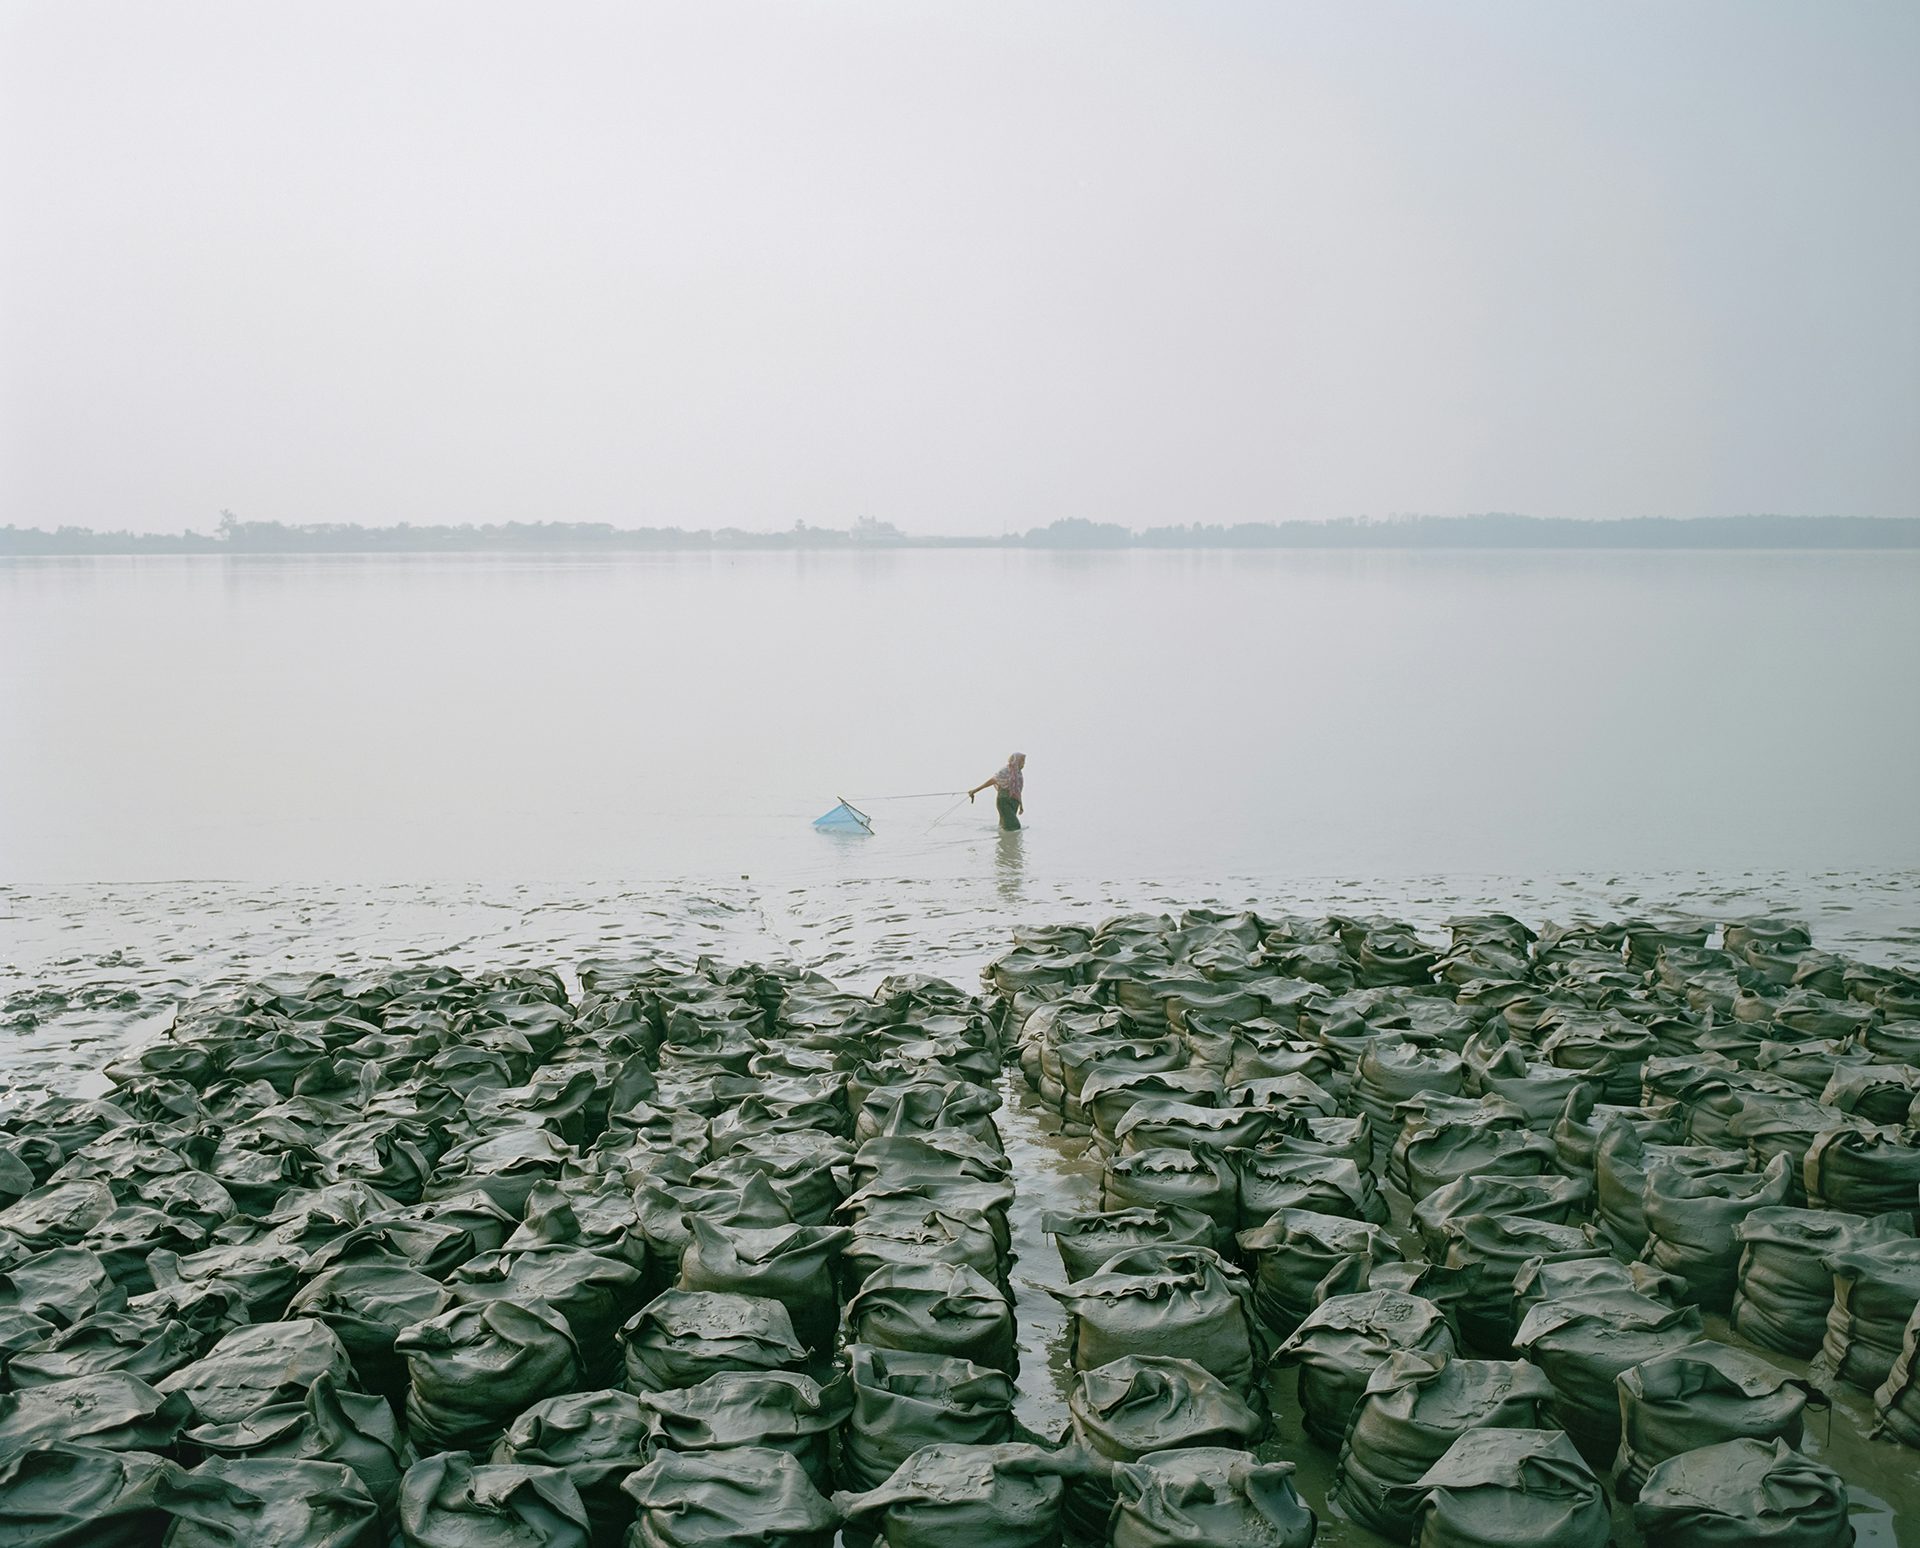 Photograph showing the effects of climate change in Bangladesh by Shunta Kimura